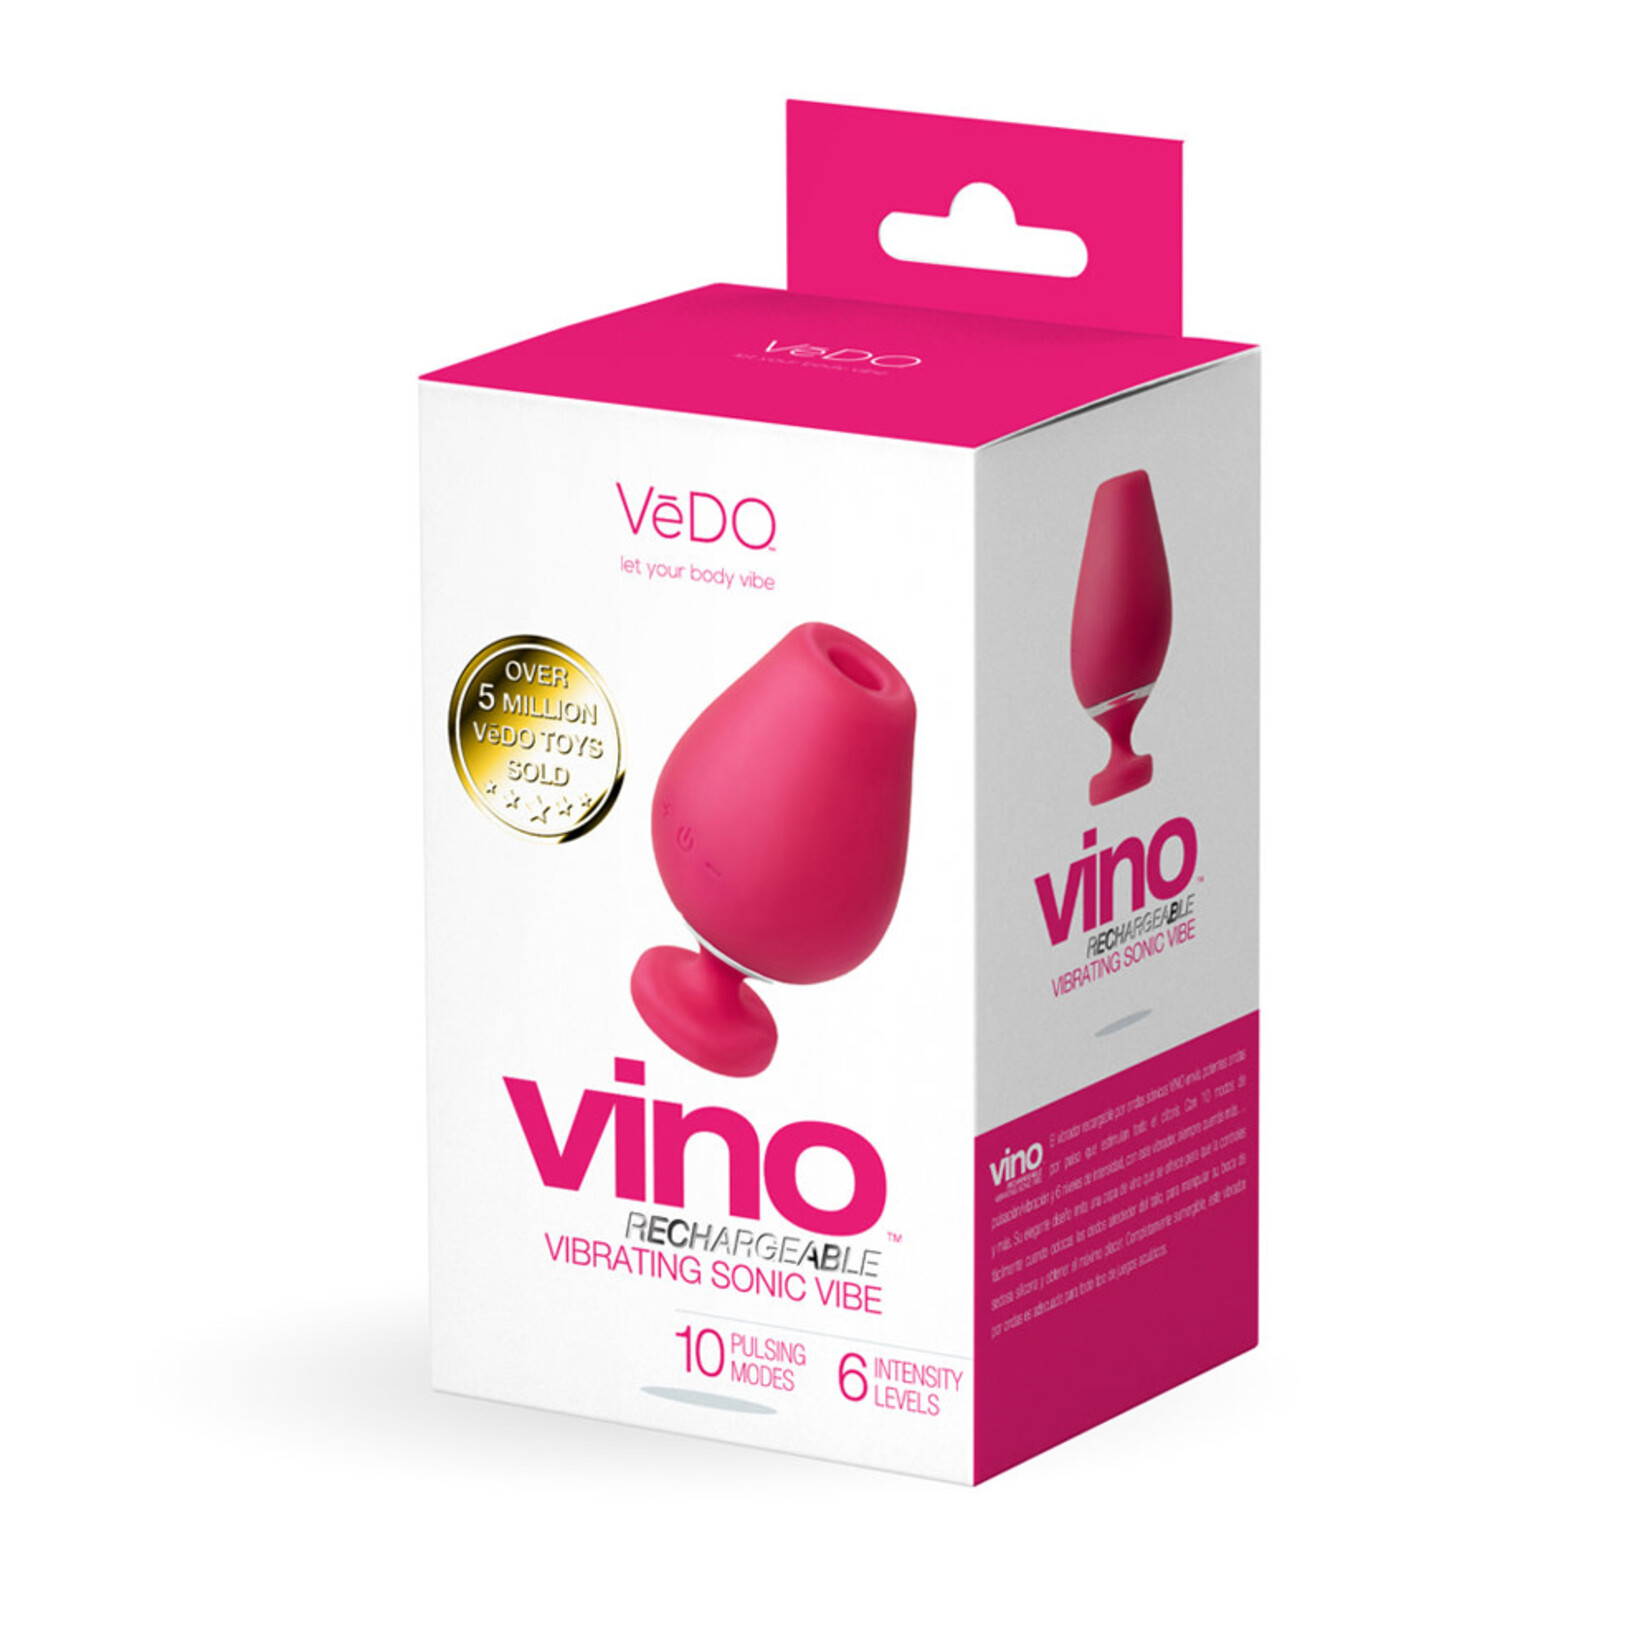 VEDO VINO RECHARGEABLE VIBRATING SONIC VIBE IN PINK